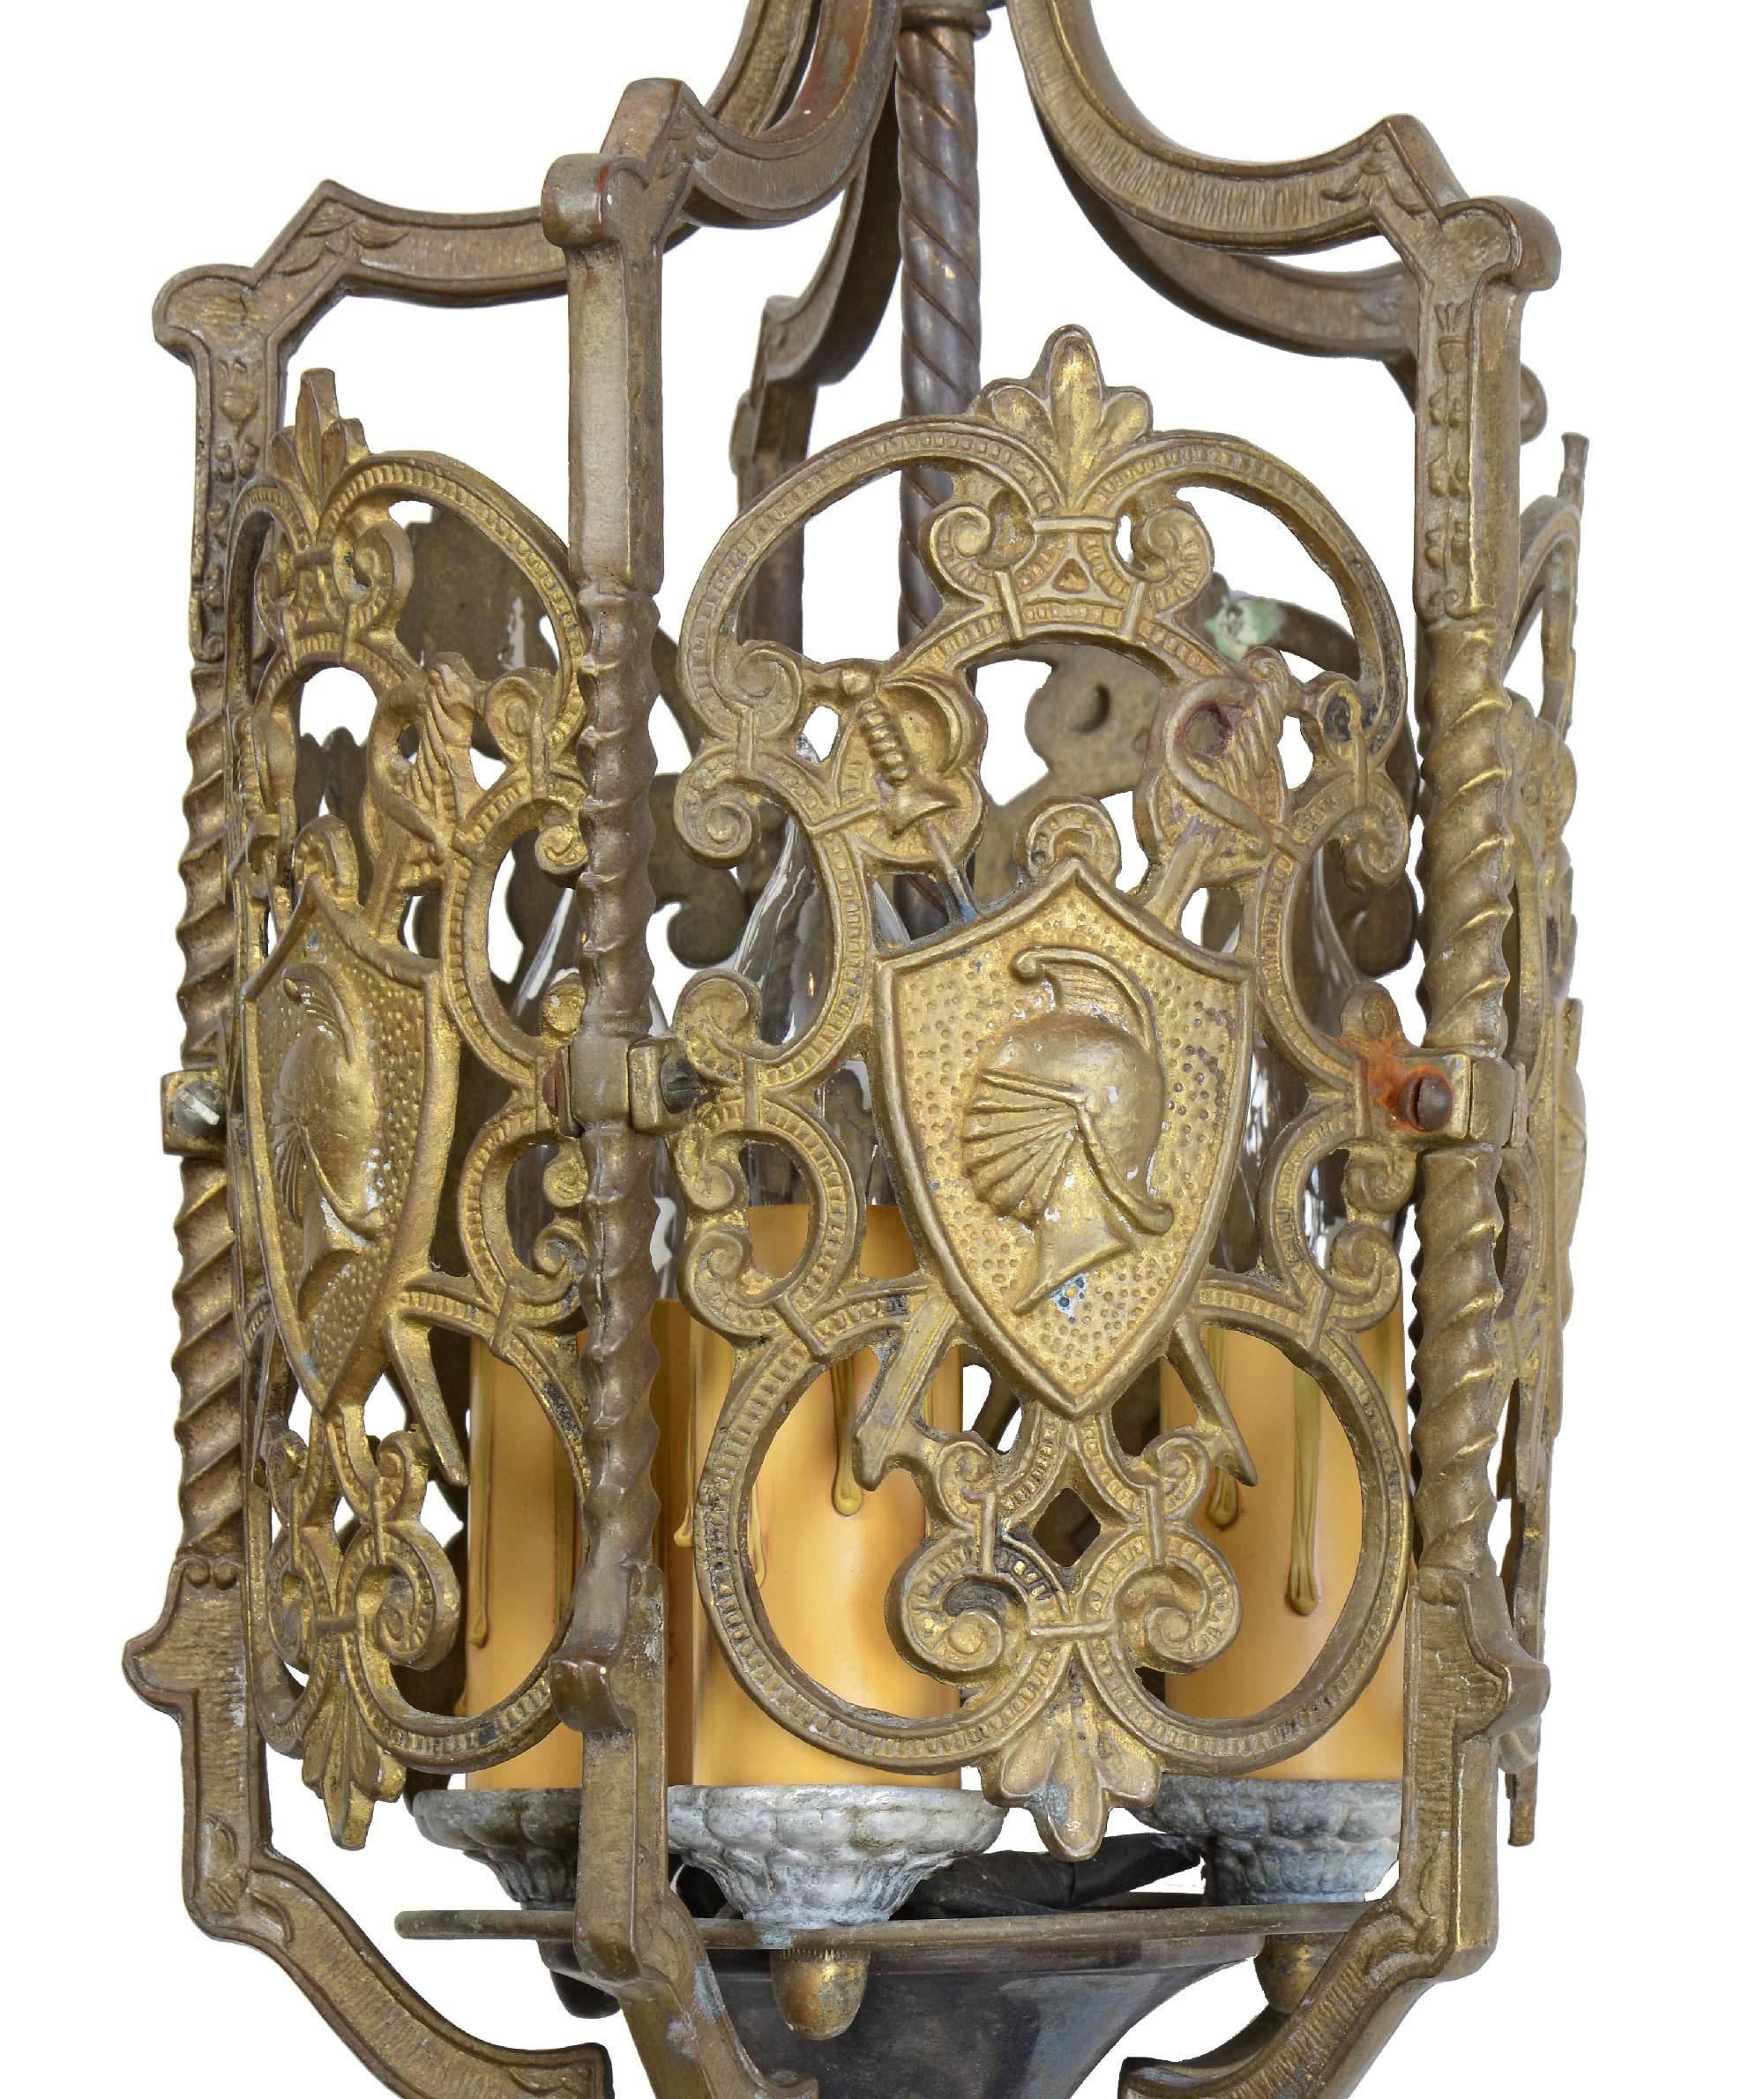 This decorative brass pendant by Moe Bridges features scrolling details, swords and shield with helmet cameo, twisted rods, anthemion’s, and dragon heads.

Brothers Henrik and Ole Moe founded the Moe Bridges Company in 1919 in Milwaukee, WI, where